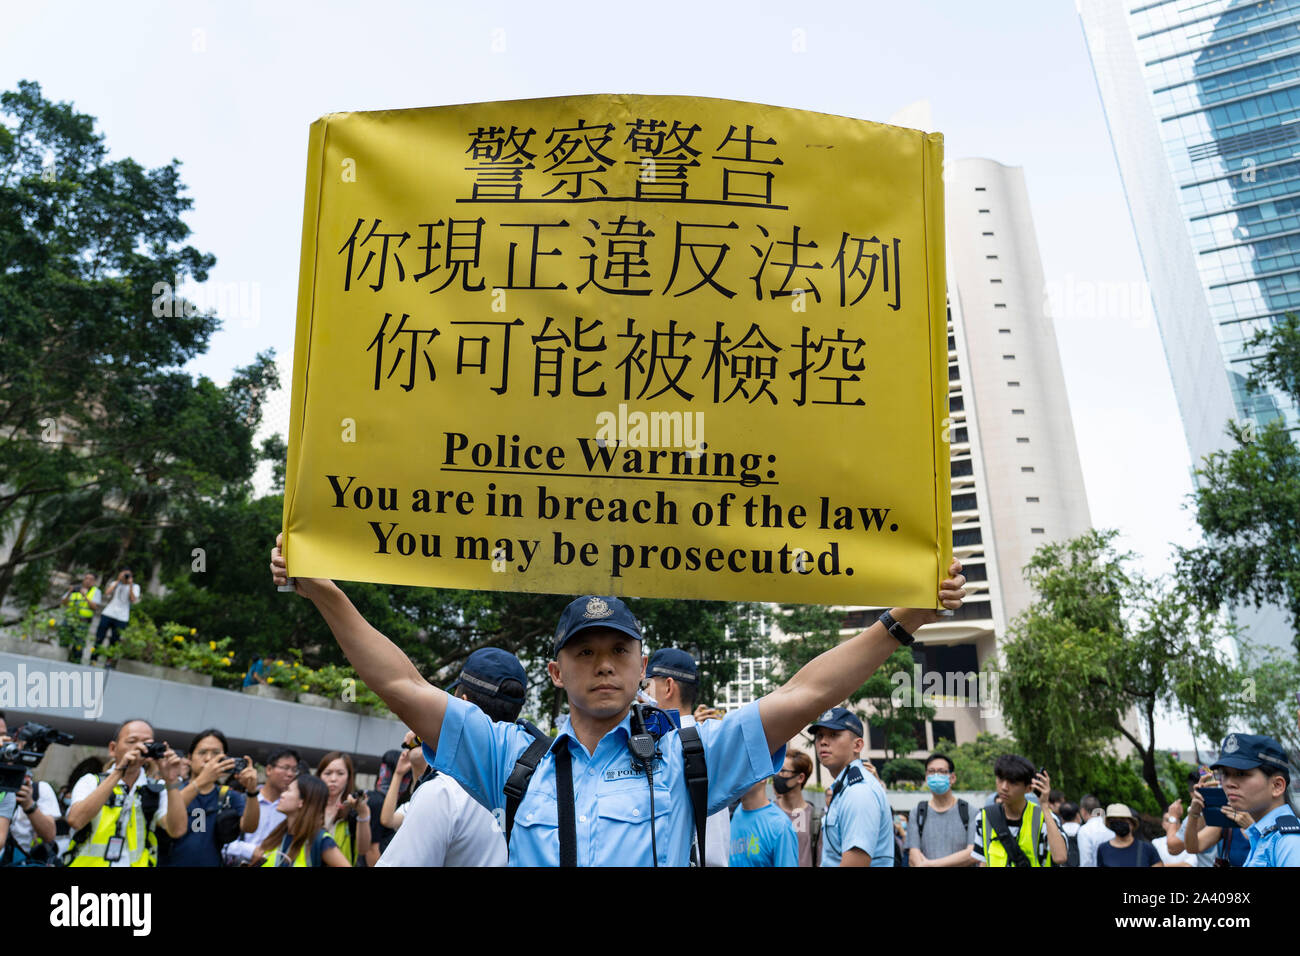 Hong Kong, China. 11th October 2019. Lunchtime flash mob demonstration by Pro-democracy demonstrators in Chater Square , Central District in Hong Kong. The protestors gathered to protest about treatment of those arrested by the police during Pro-democracy protests in the last 4 months. Police threatened to stop demonstration but it passed peacefully and concluded with march through city streets . Iain Masterton/Alamy Live News. Stock Photo